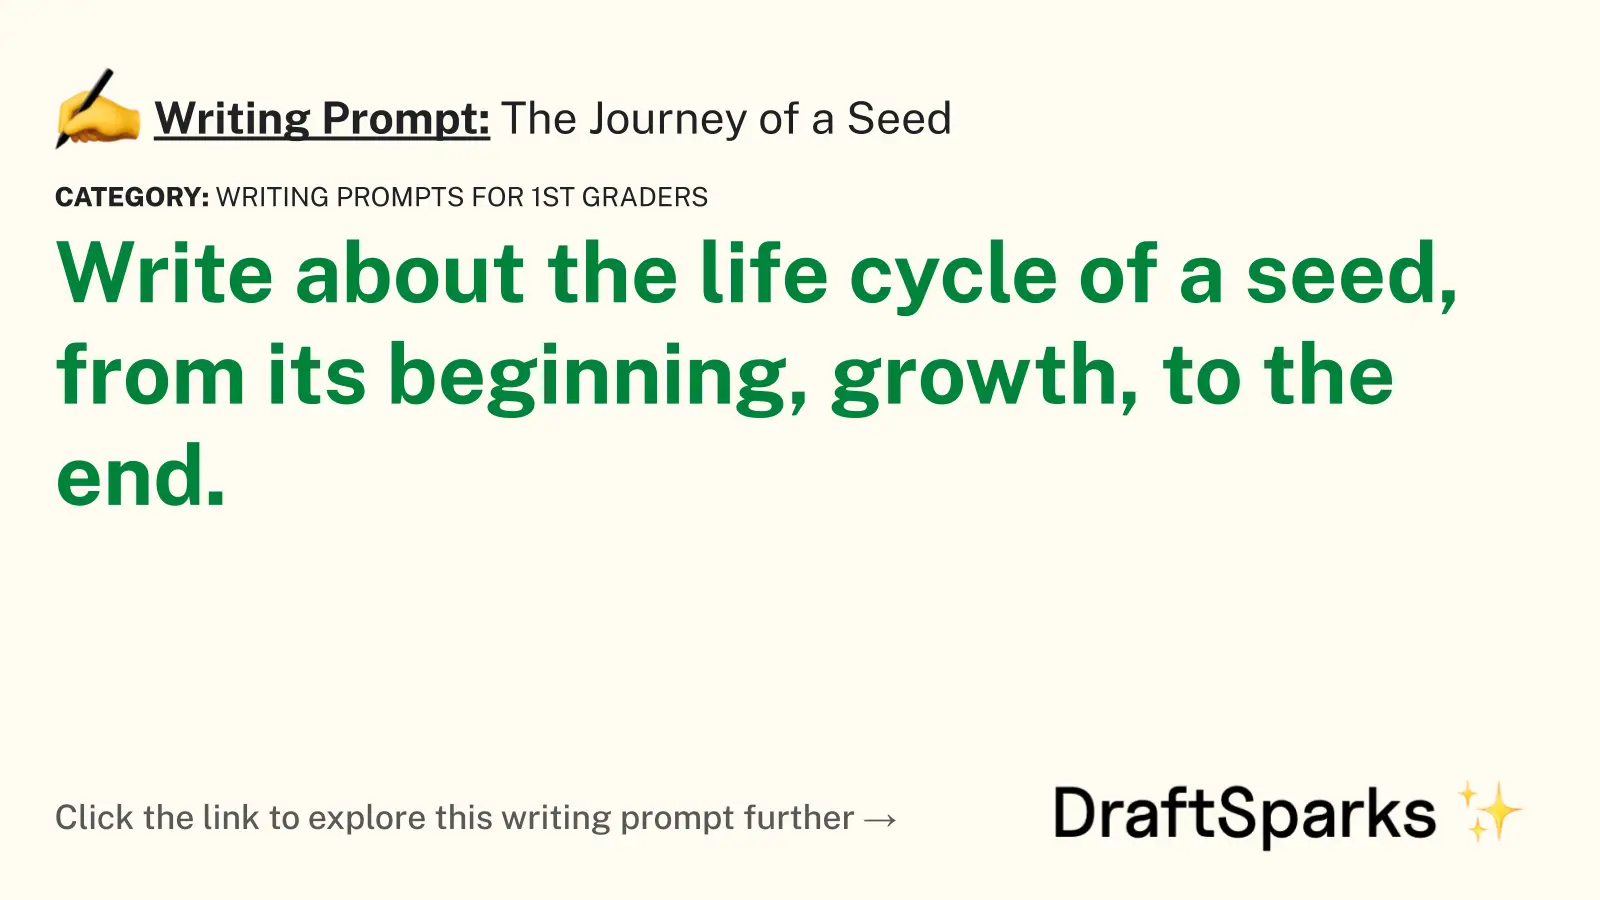 The Journey of a Seed